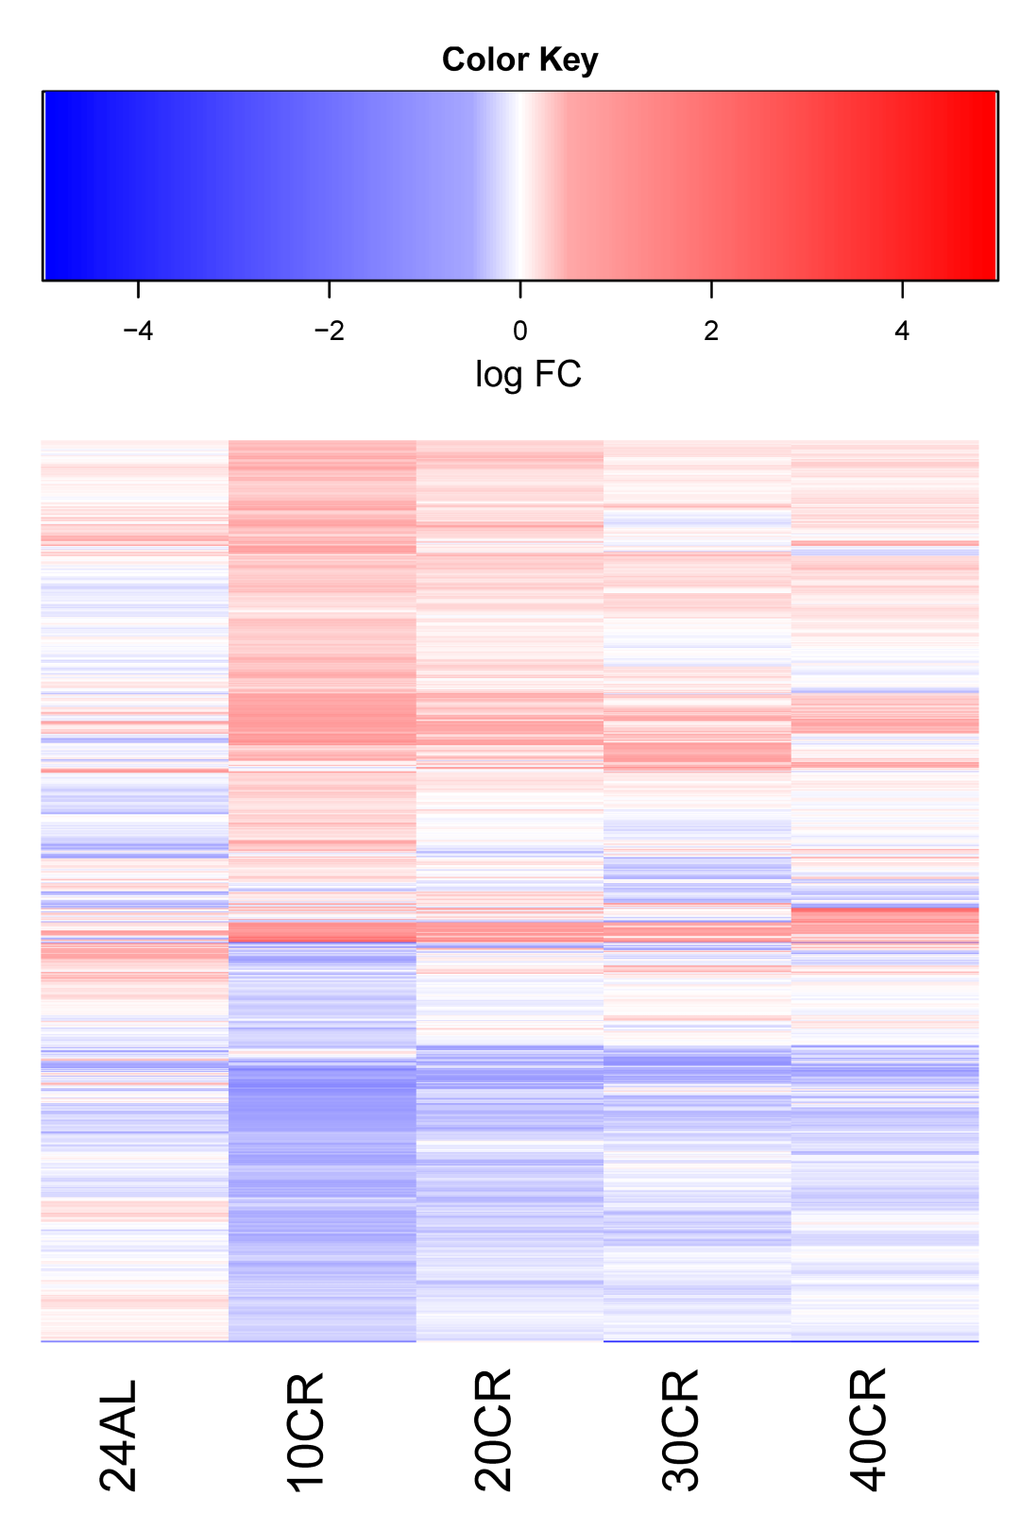 Log Fold change of differentially expressed genes in at least one treatment relative to 12 hour ad libitum feeding (12AL). Blue indicates down-regulation and red upregulation relative to 12AL. 10CR, 20CR, 30CR and 40CR refer to 10 %, 20 %, 30 % and 40 % restriction and 24AL to 24h ad libitum feeding.